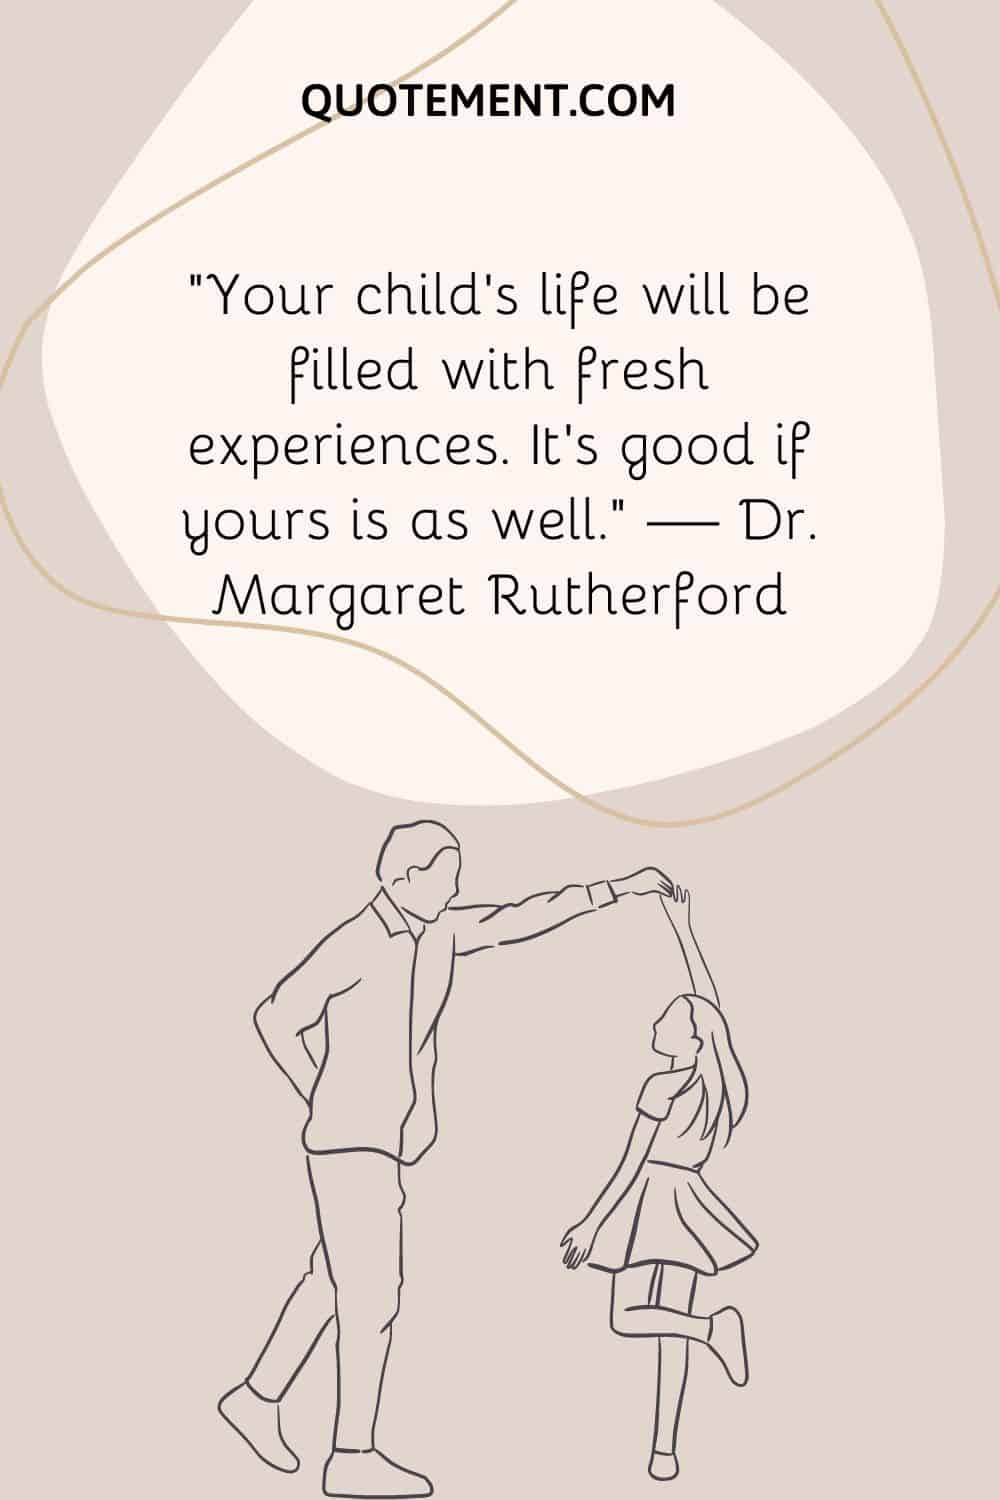 “Your child’s life will be filled with fresh experiences. It’s good if yours is as well.” — Dr. Margaret Rutherford